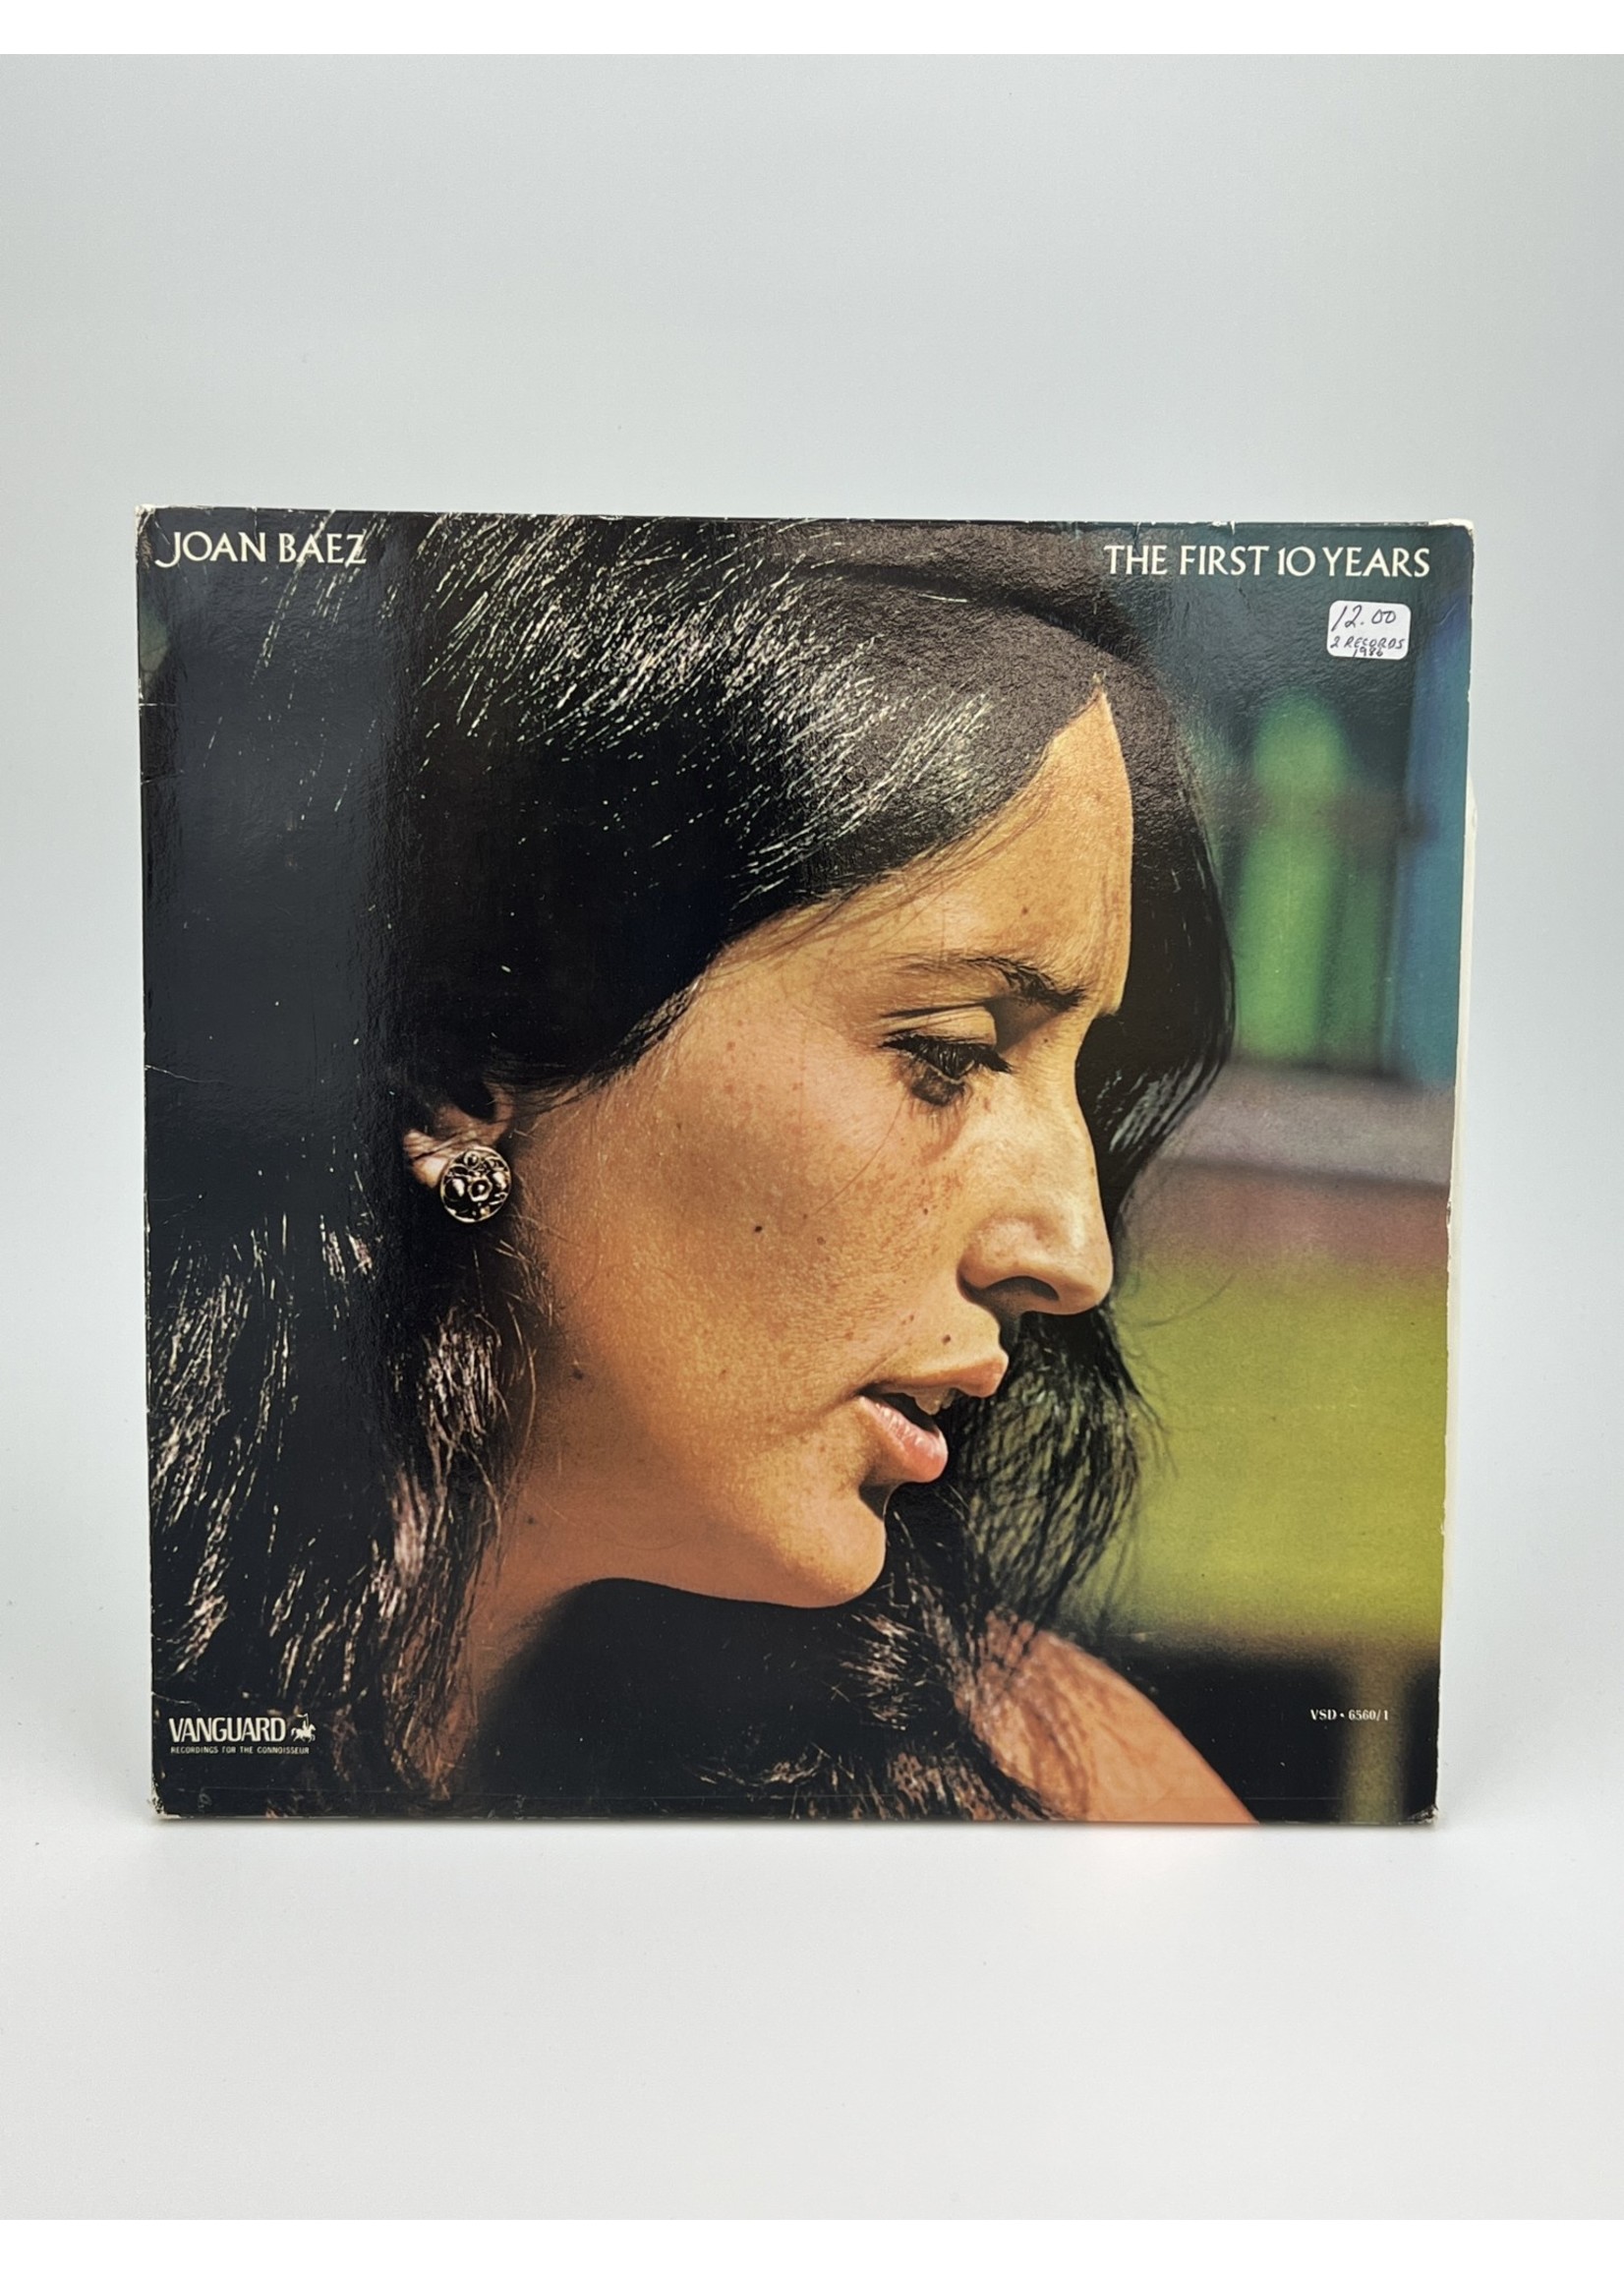 LP Joan Baez The First 10 Years LP Record